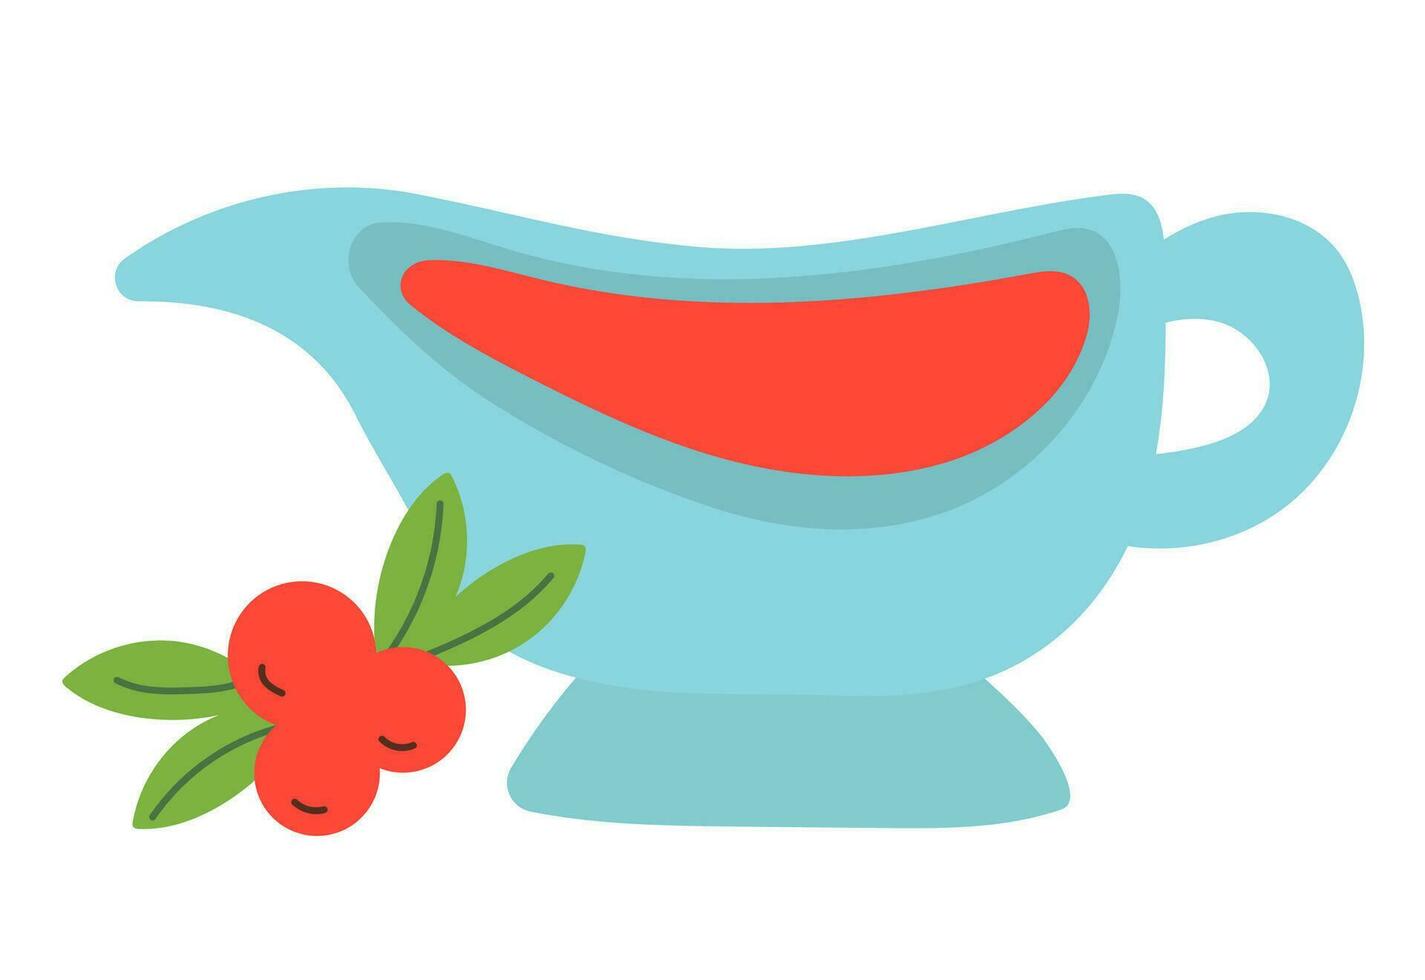 Gravy Boat With Cranberry Sauce and berries. Vector Flat Illustration.